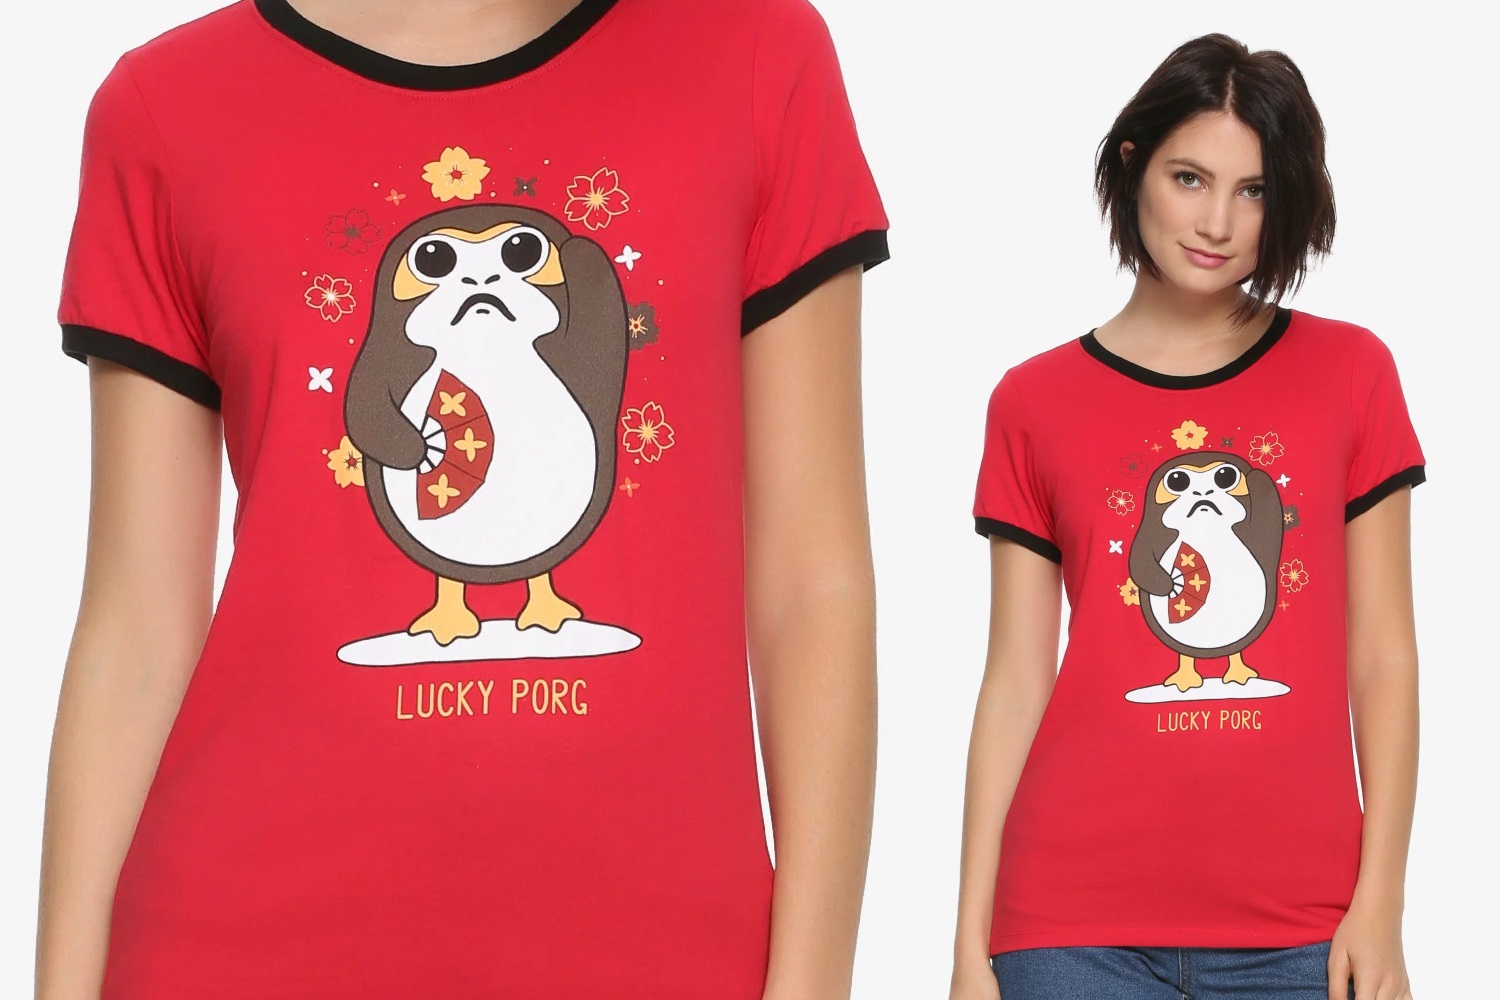 Star Wars Lucky Porg T-Shirt at Box Lunch